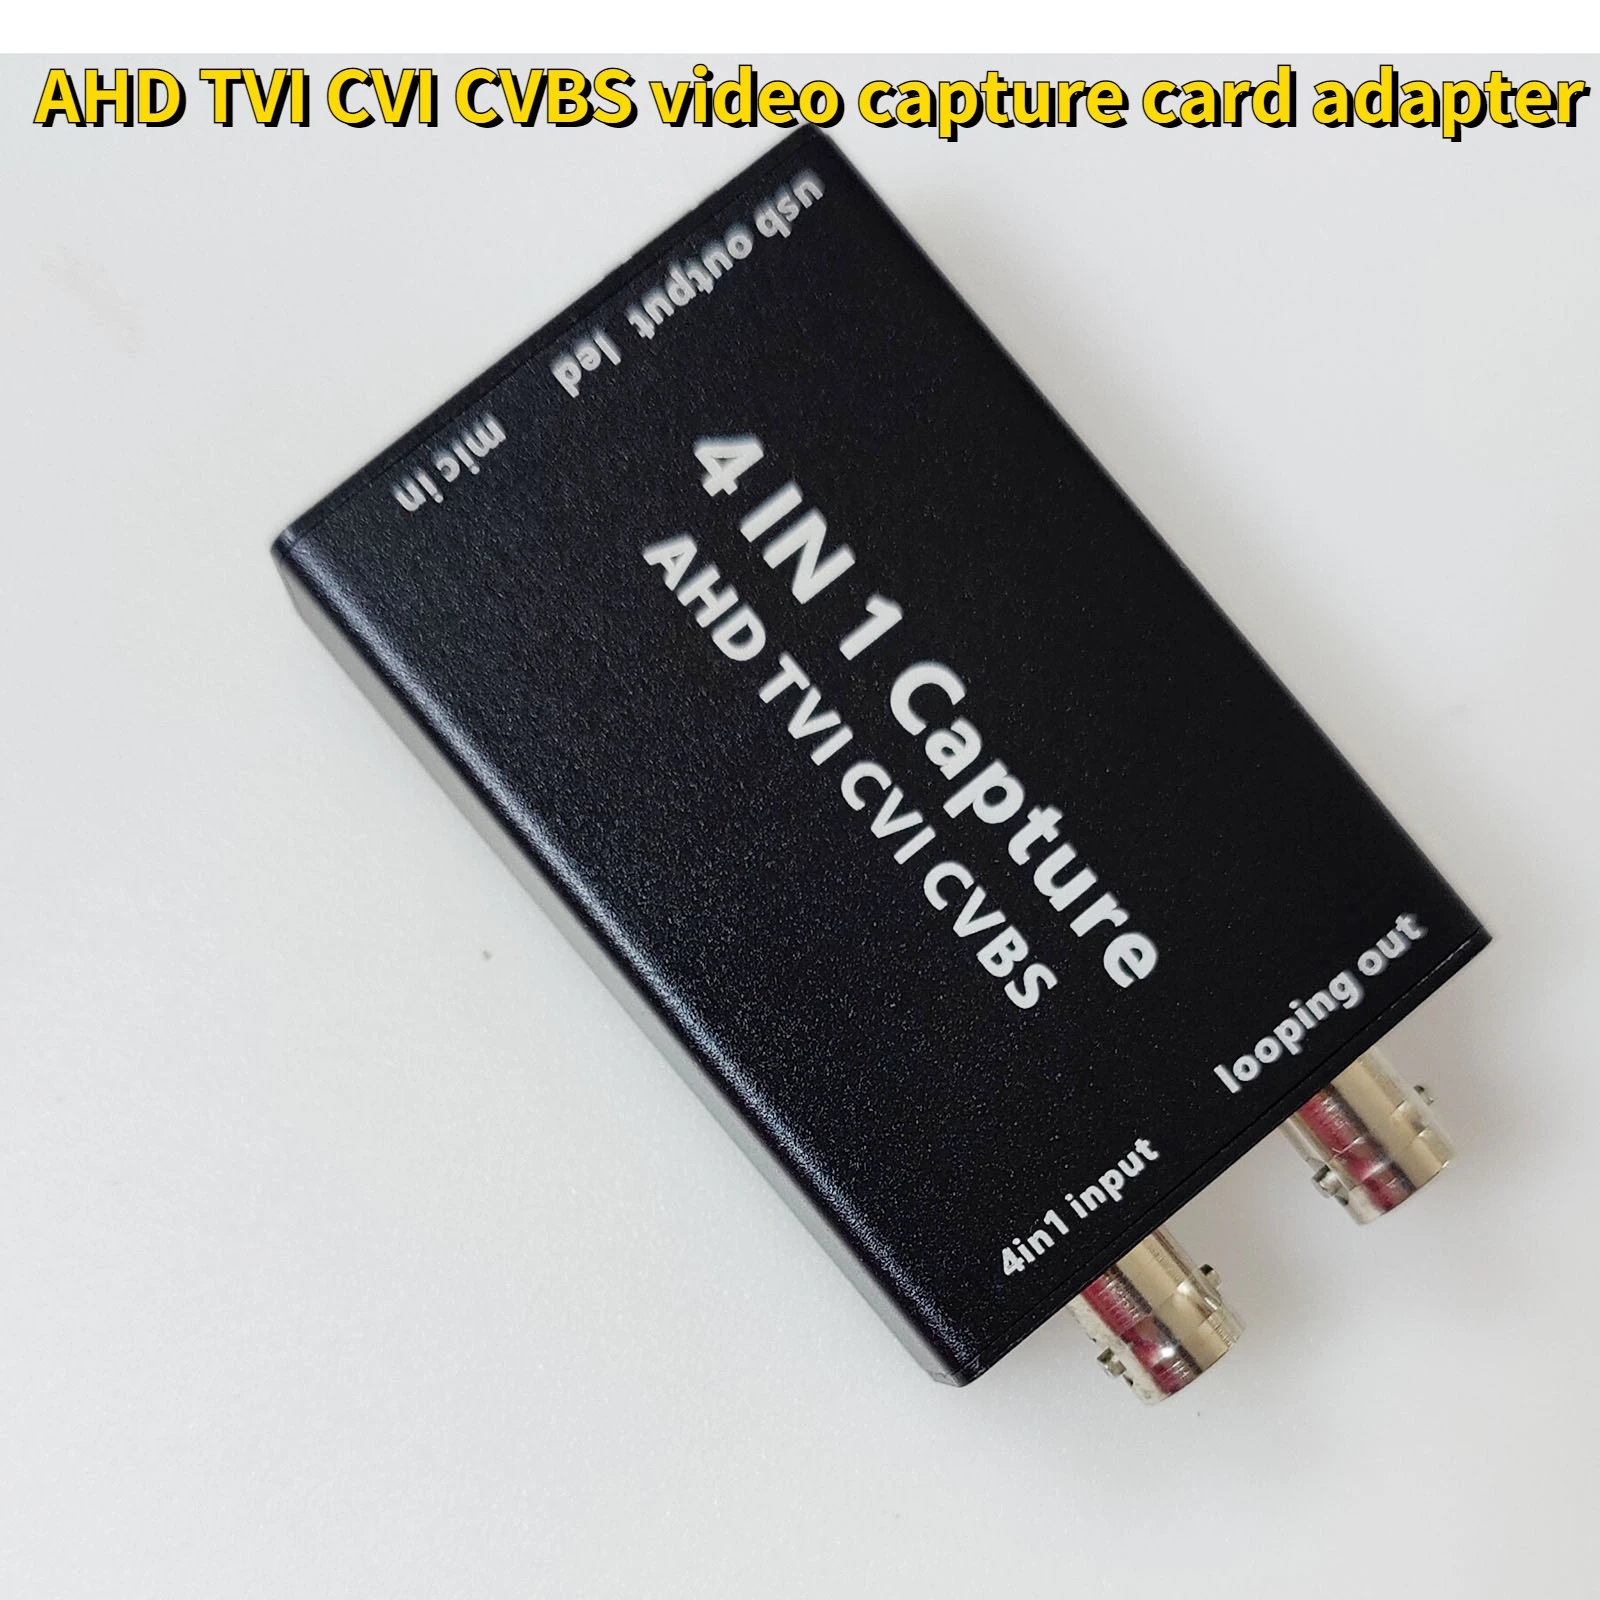 HD Analog Camera Input AHD to Digital USB Camera Adapter Board UVC Free Drive AHD TVI CVI CVBS video capture card adapter awind ezcap 241 music digitizer audio capture recorder box convert old analog music to mp3 support usb drive or for sd card